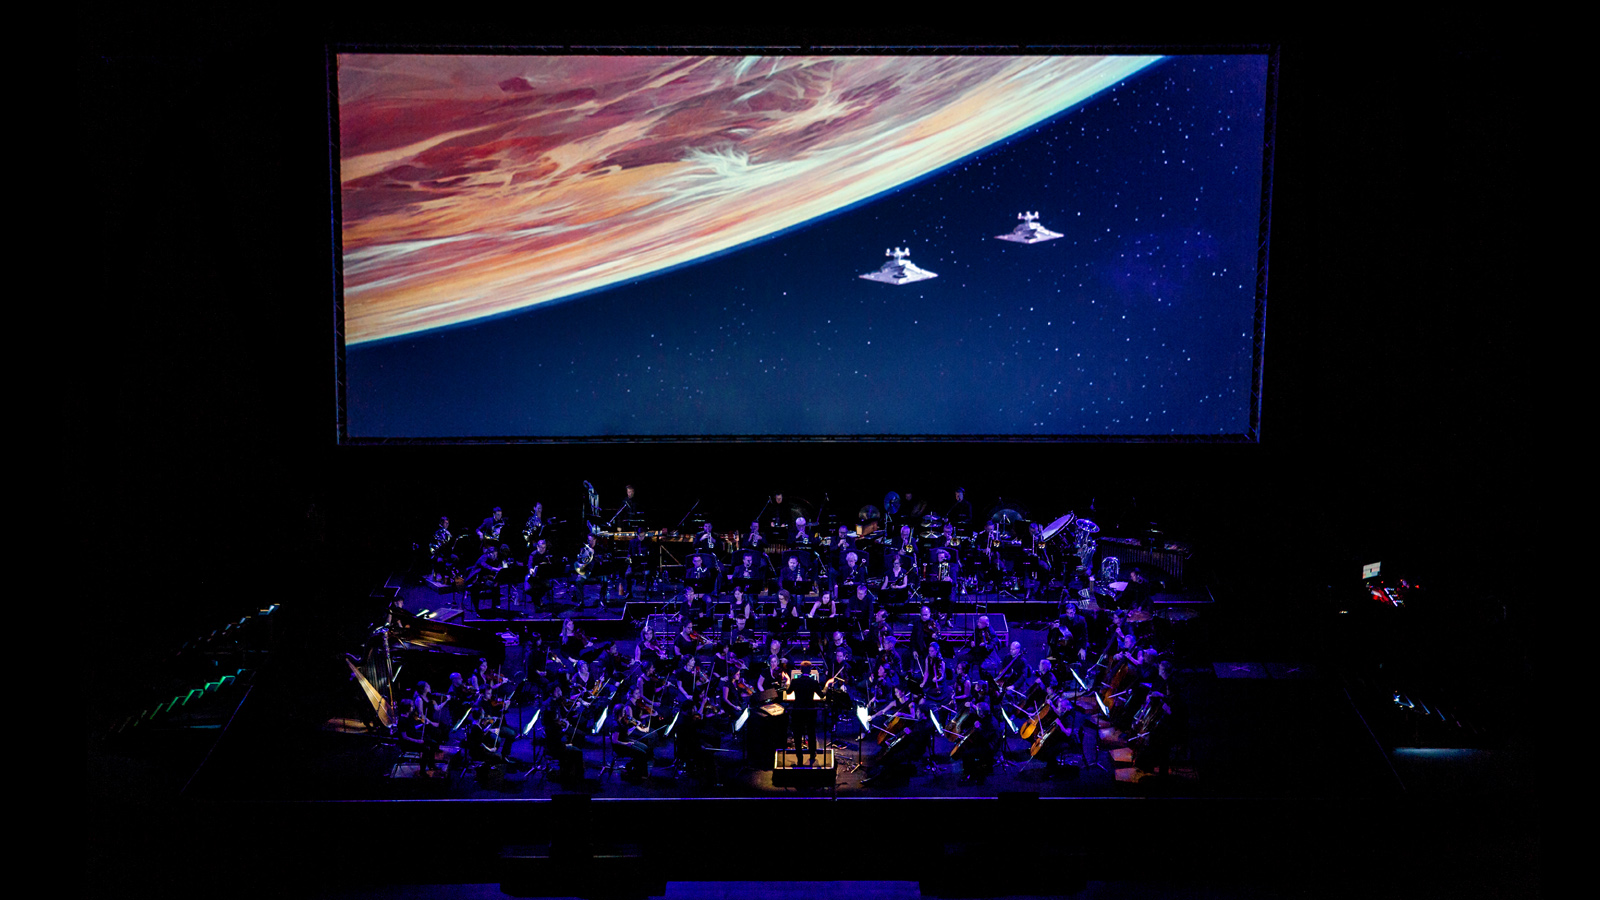 A screen with spaceships and planets on overlooking an orchestra on stage.